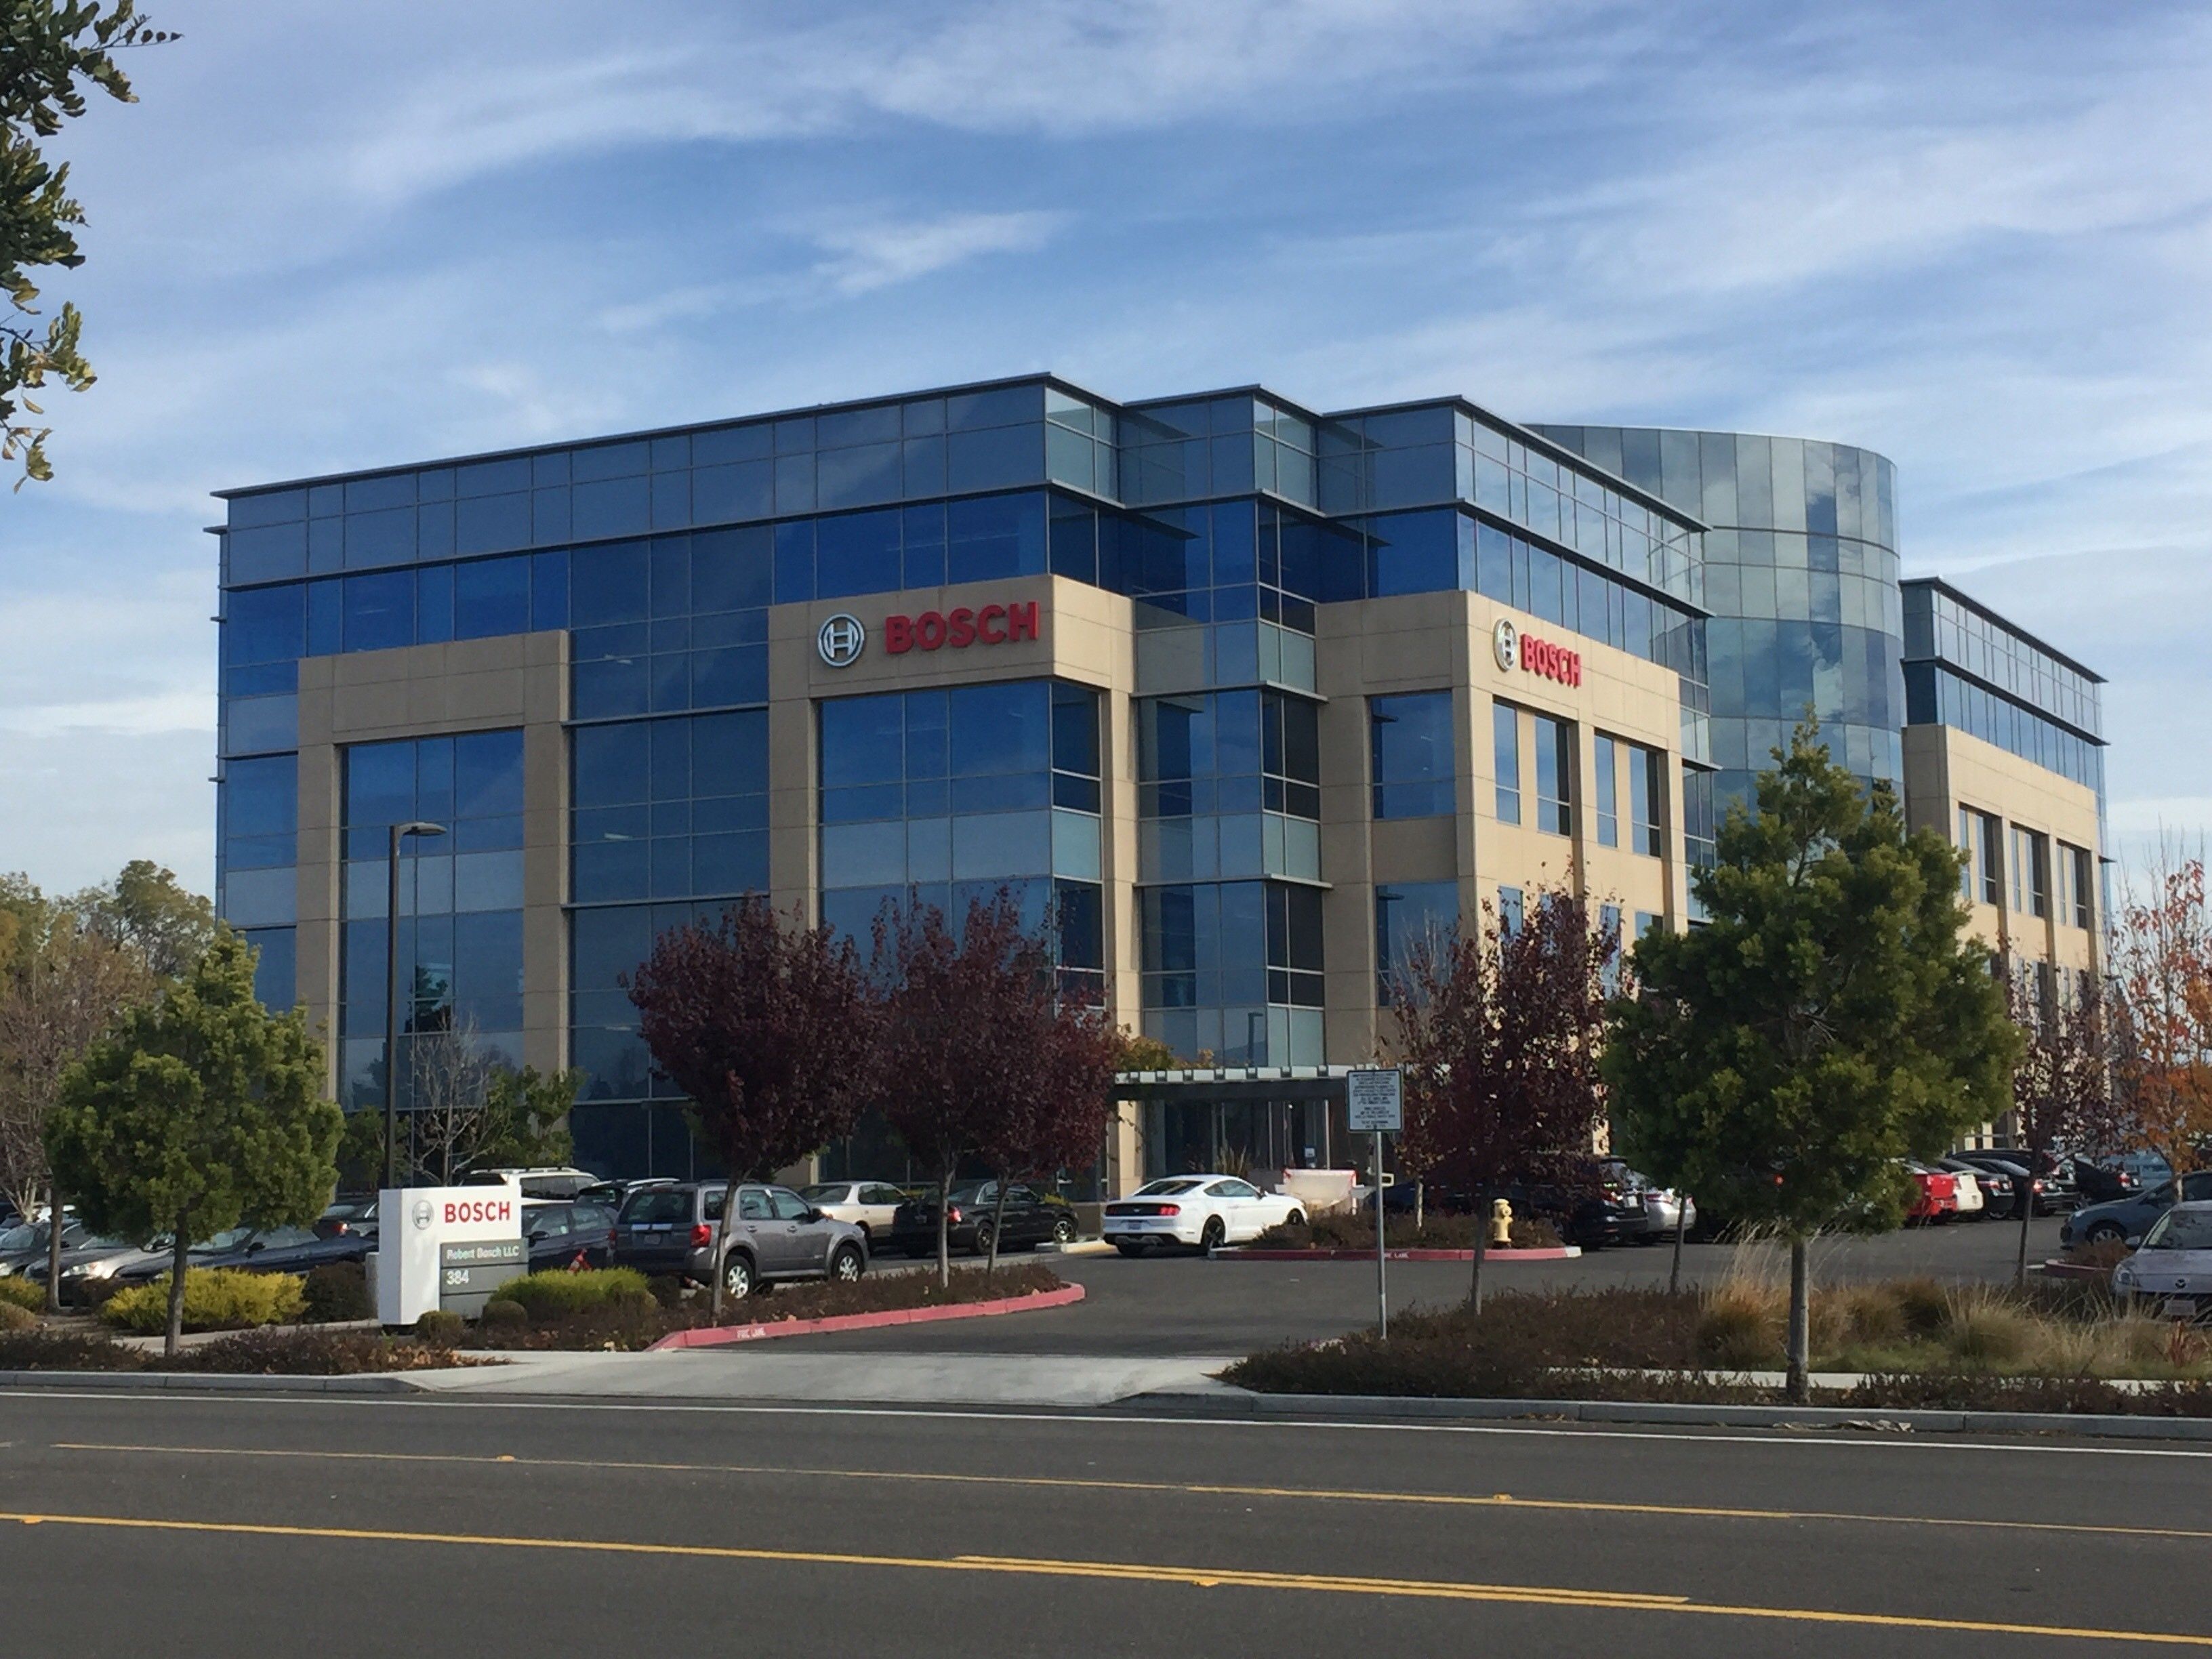 Finger on the pulse of Silicon Valley: Bosch Research and Technology Center in Sunnyvale